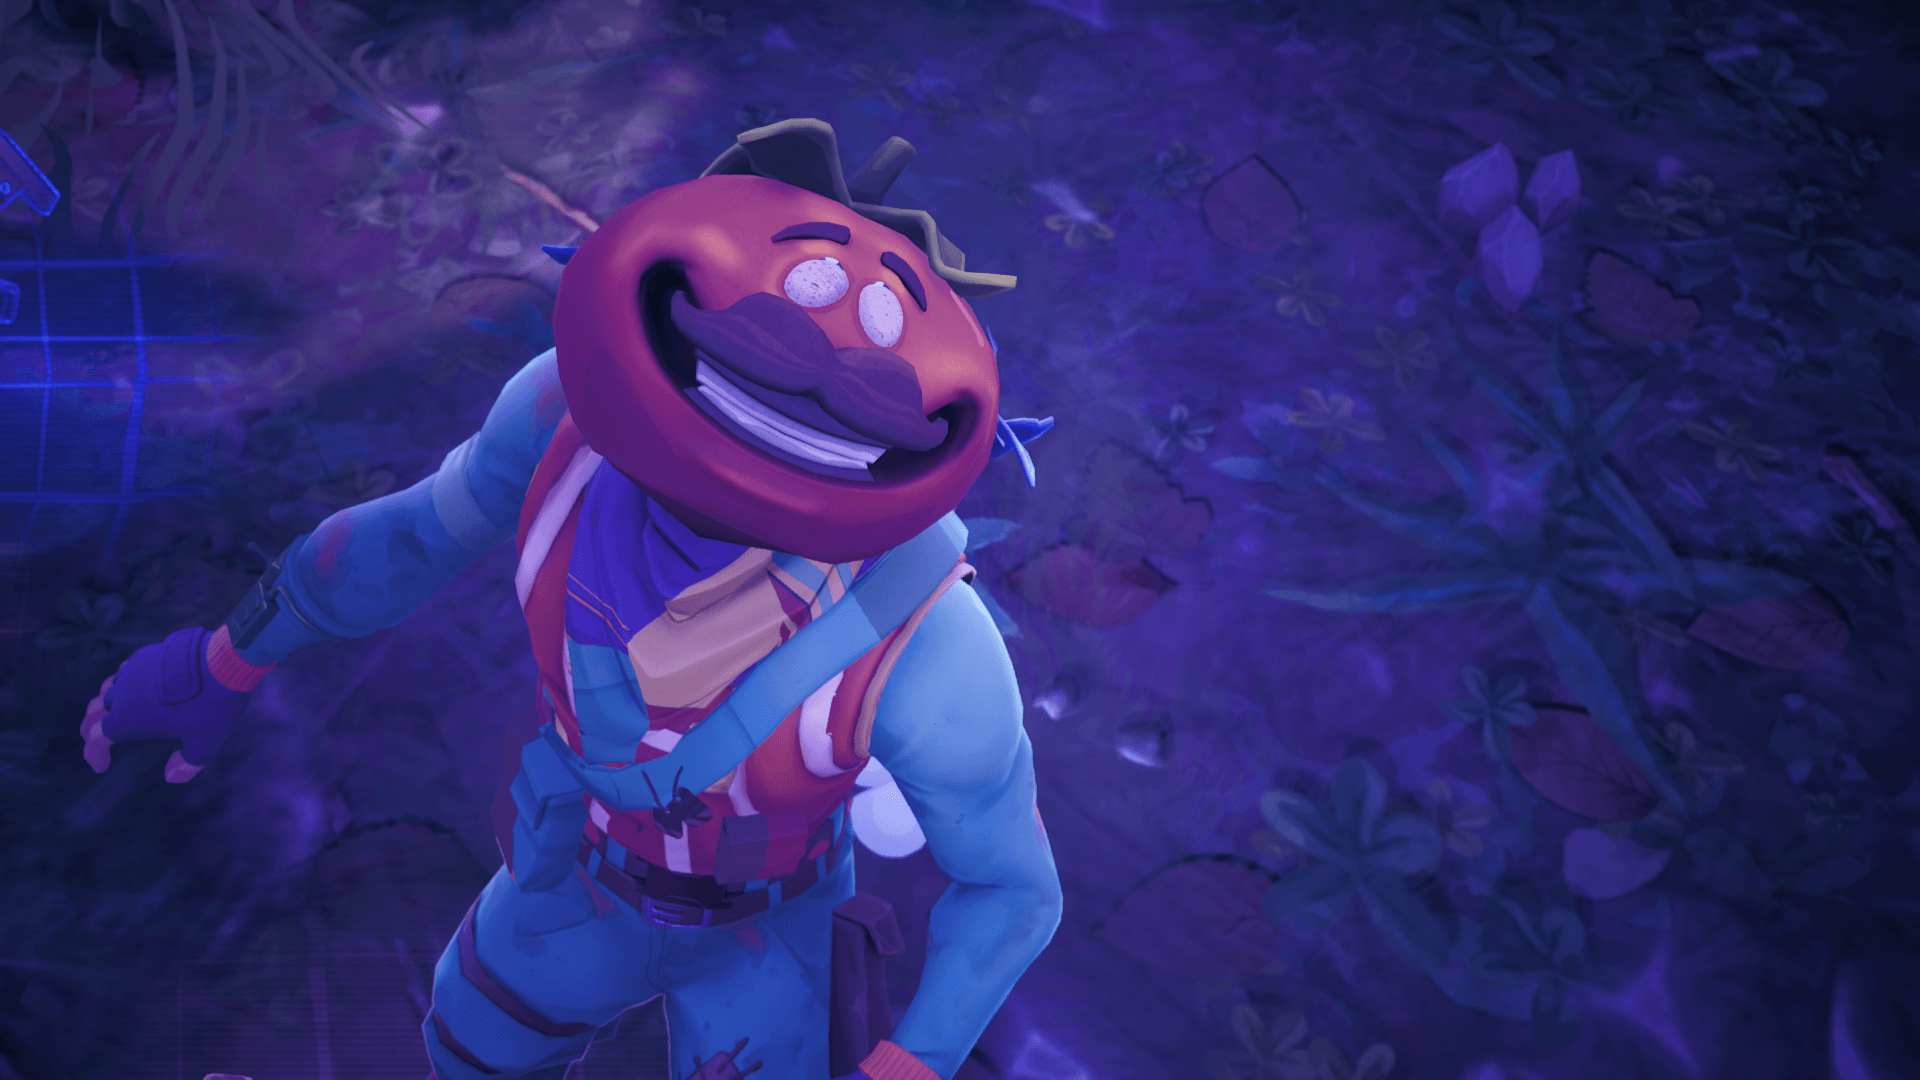 CREEPY If you go into the replay mode the time tomato head dies his